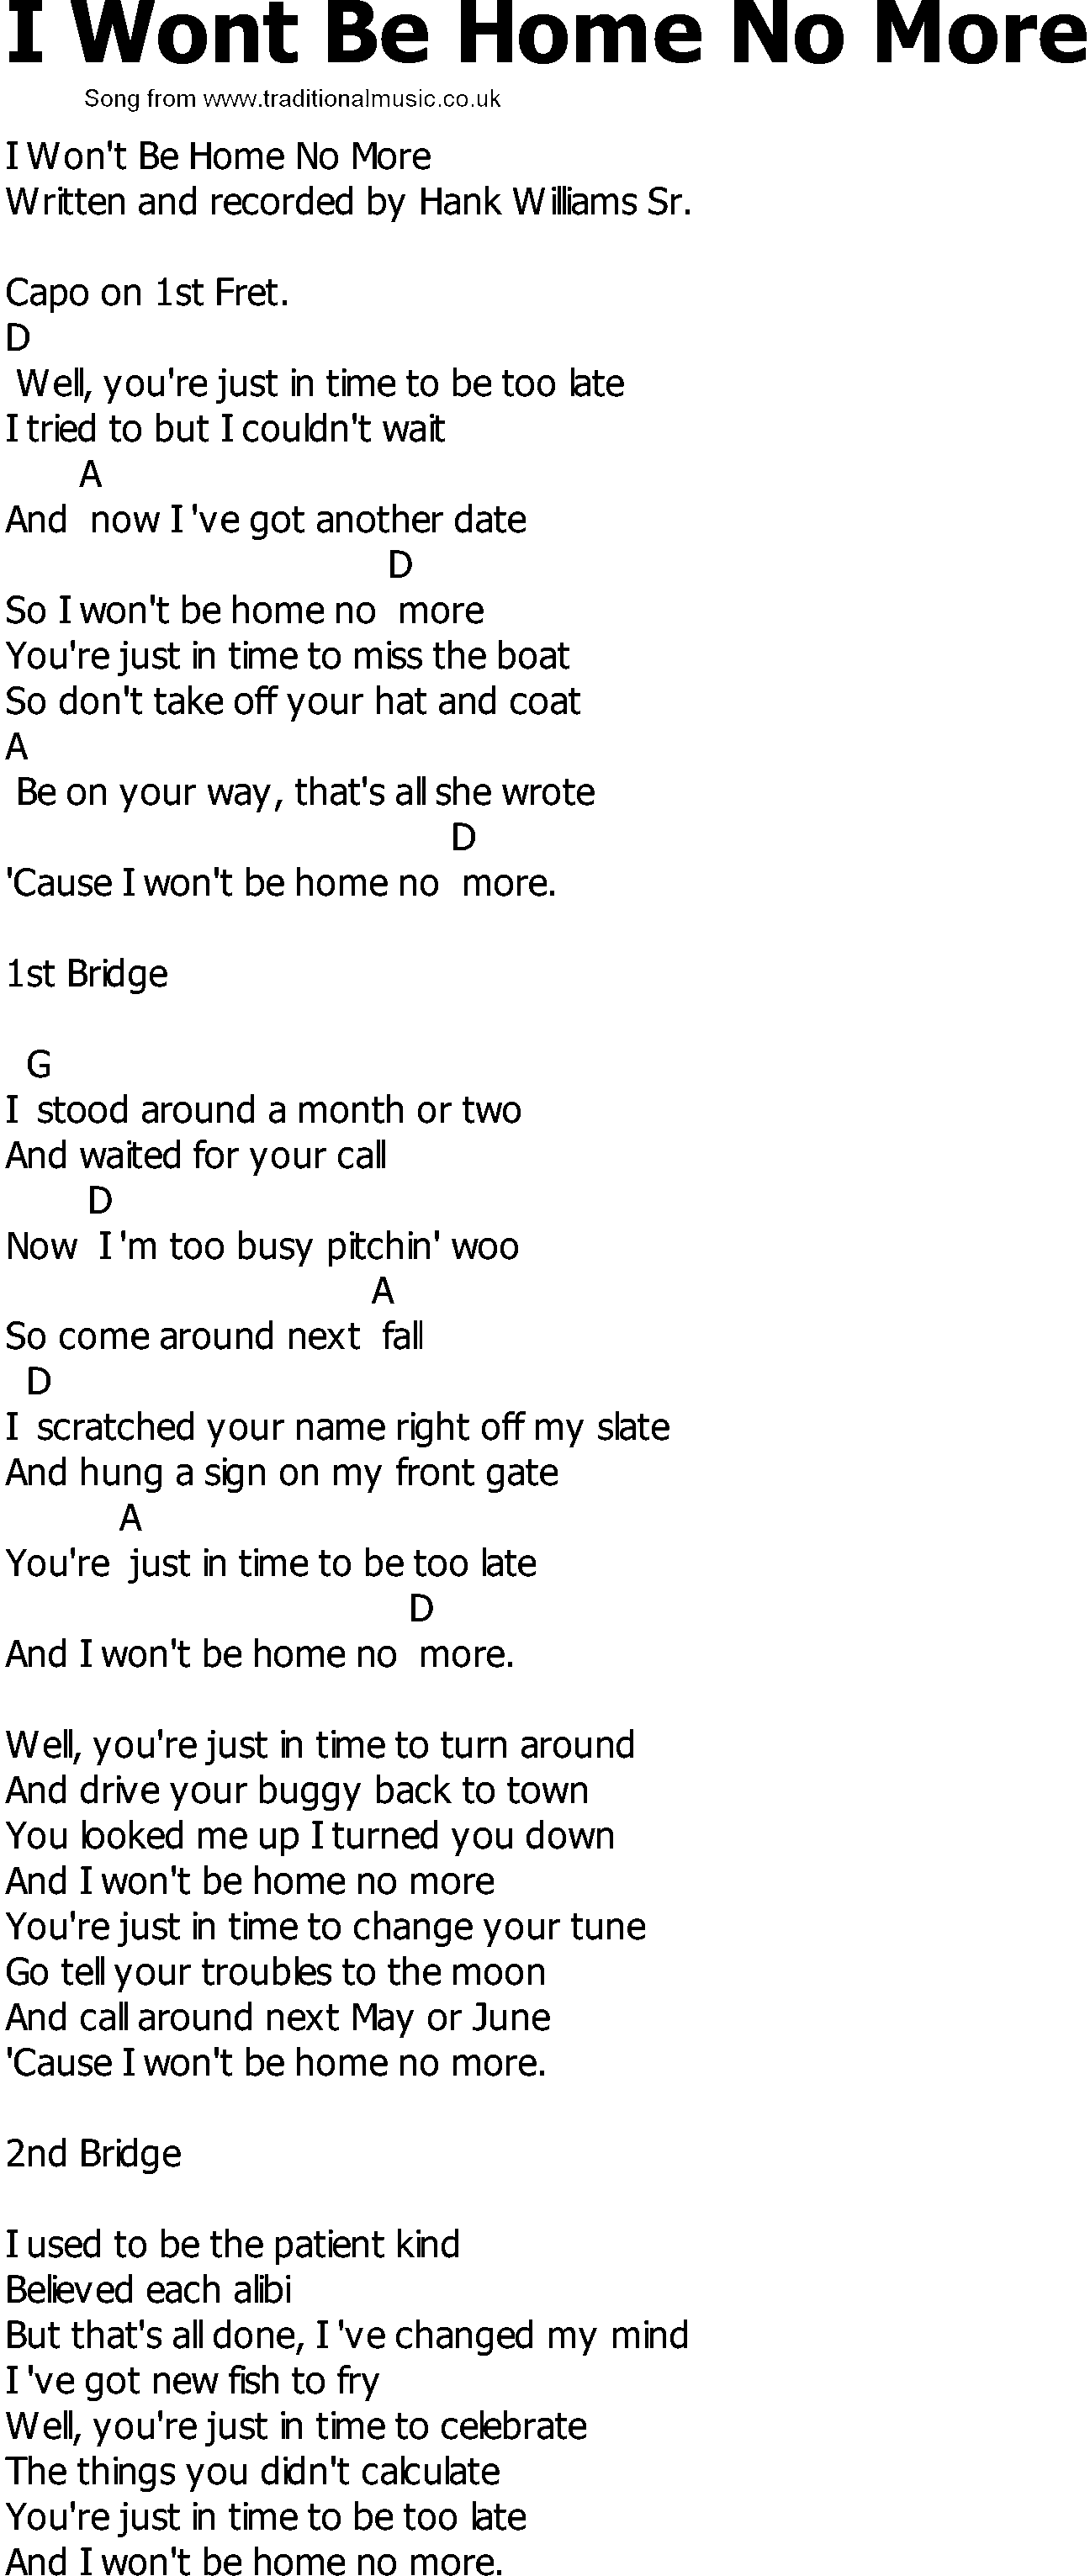 Old Country song lyrics with chords - I Wont Be Home No More